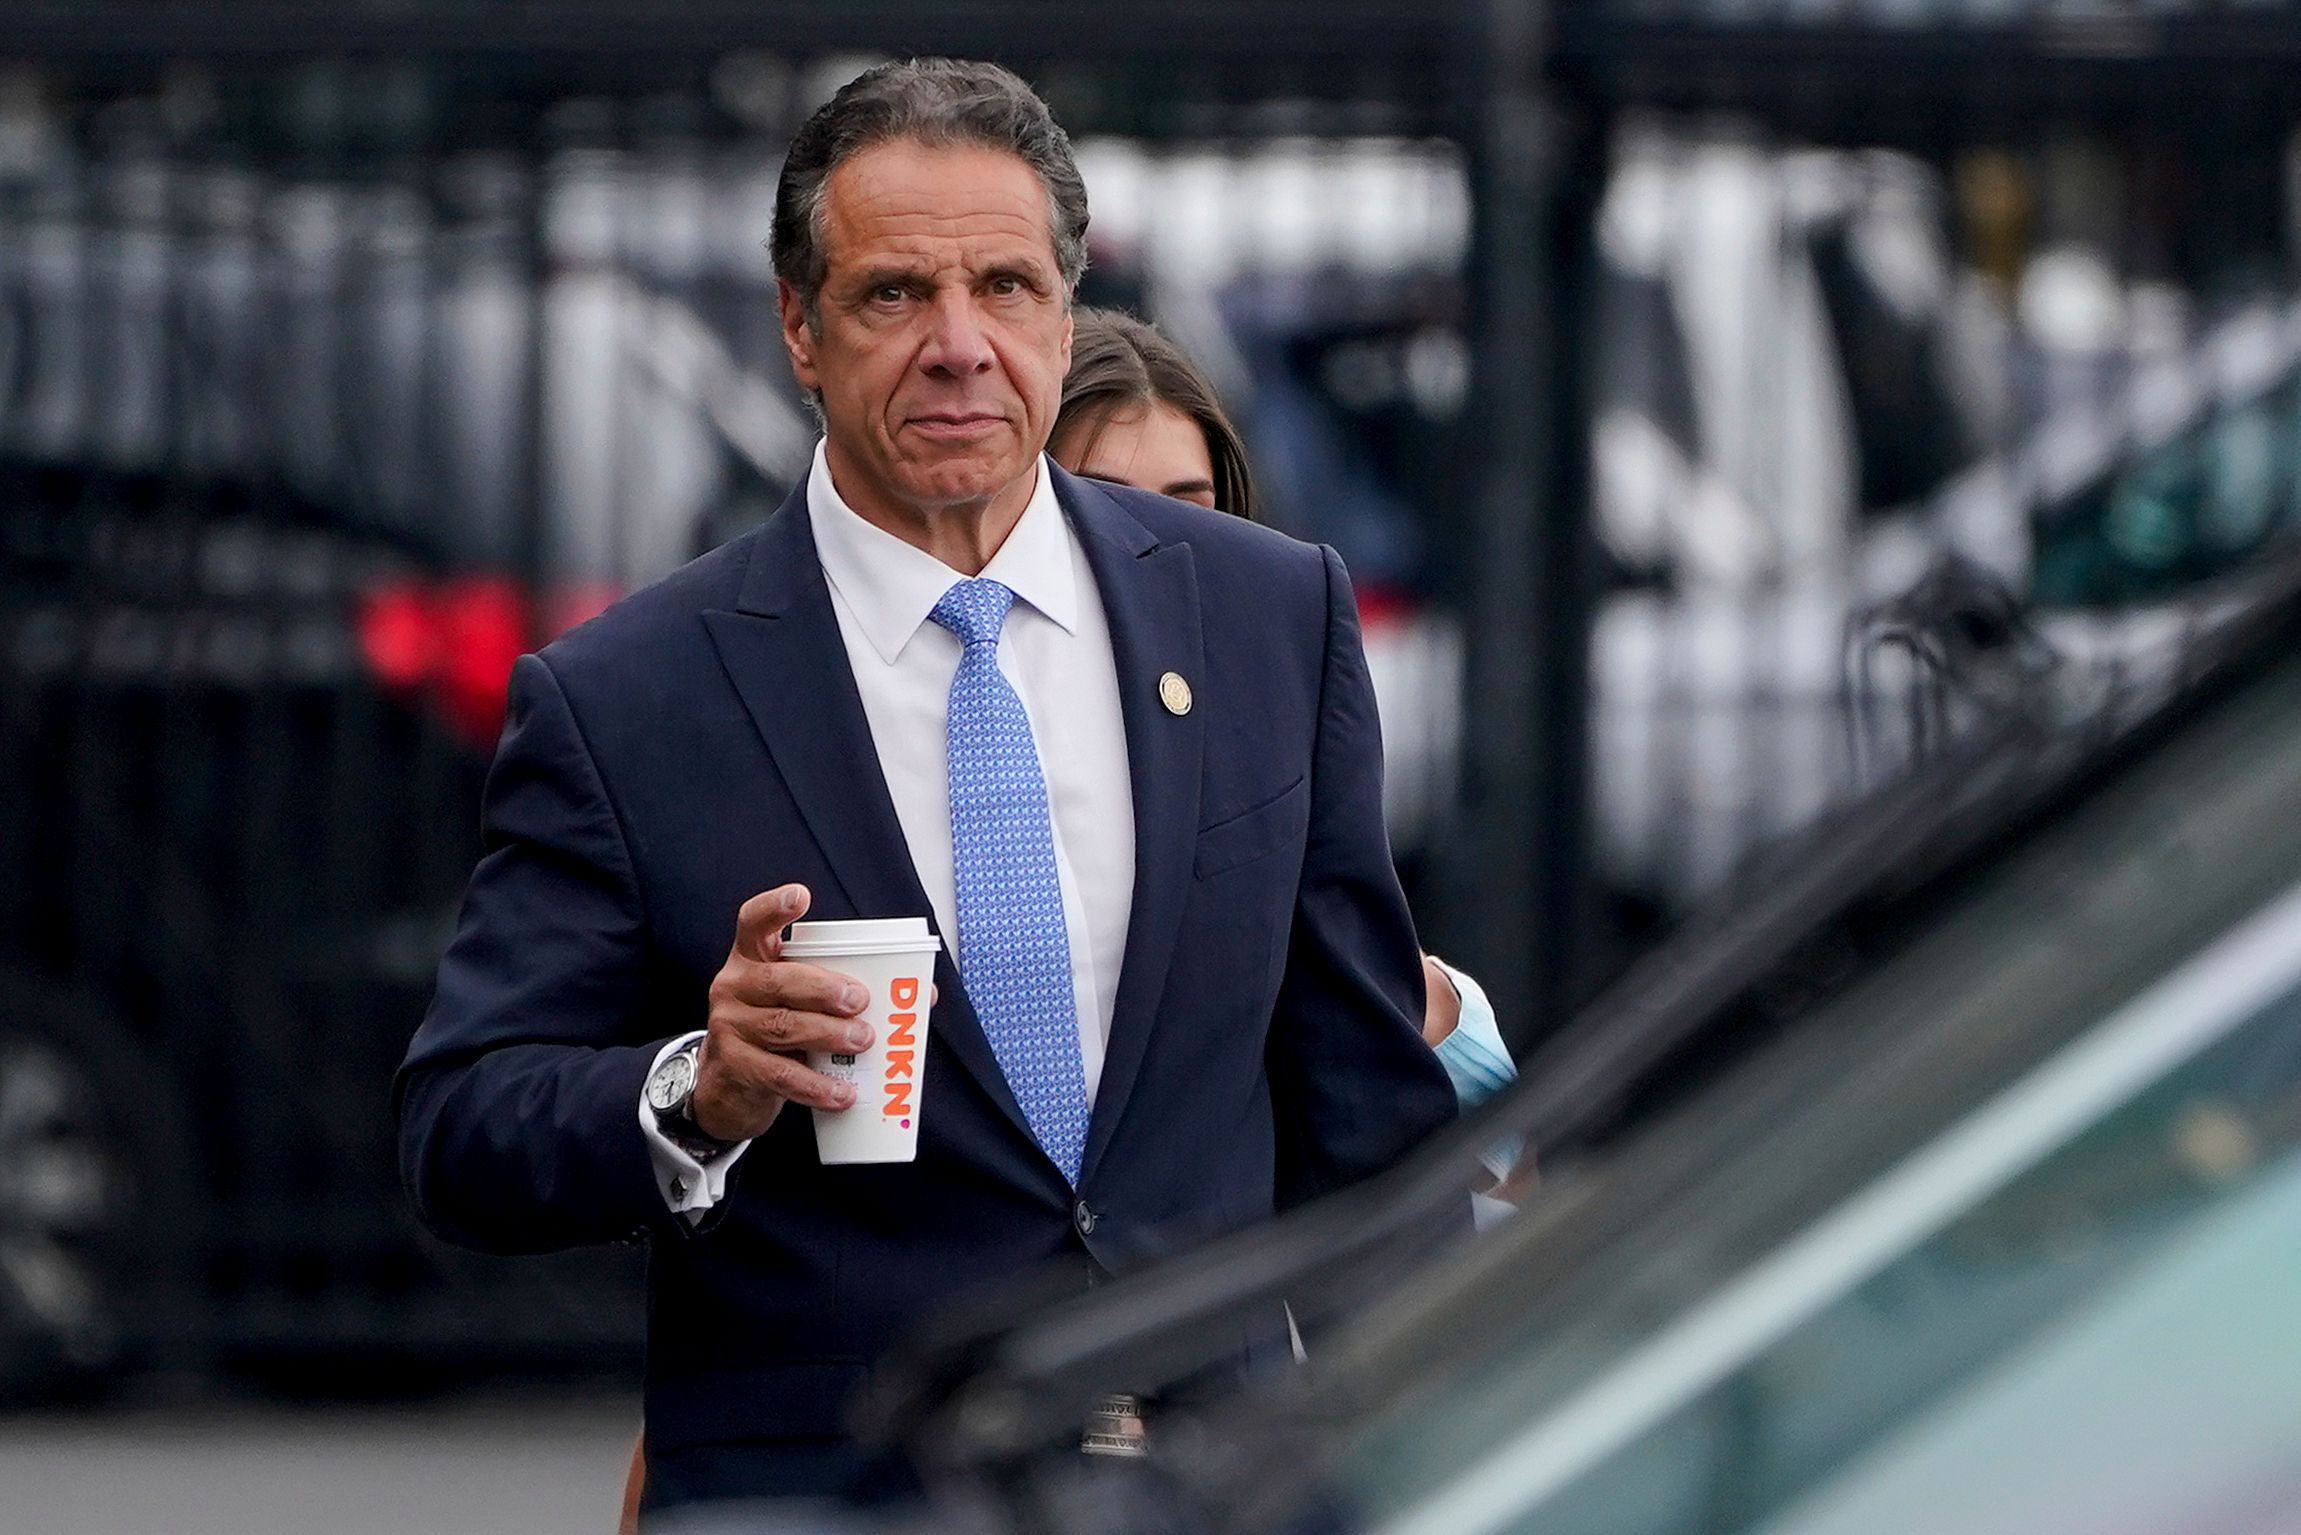 Andrew Cuomo probe finds ‘overwhelming evidence’ of misconduct